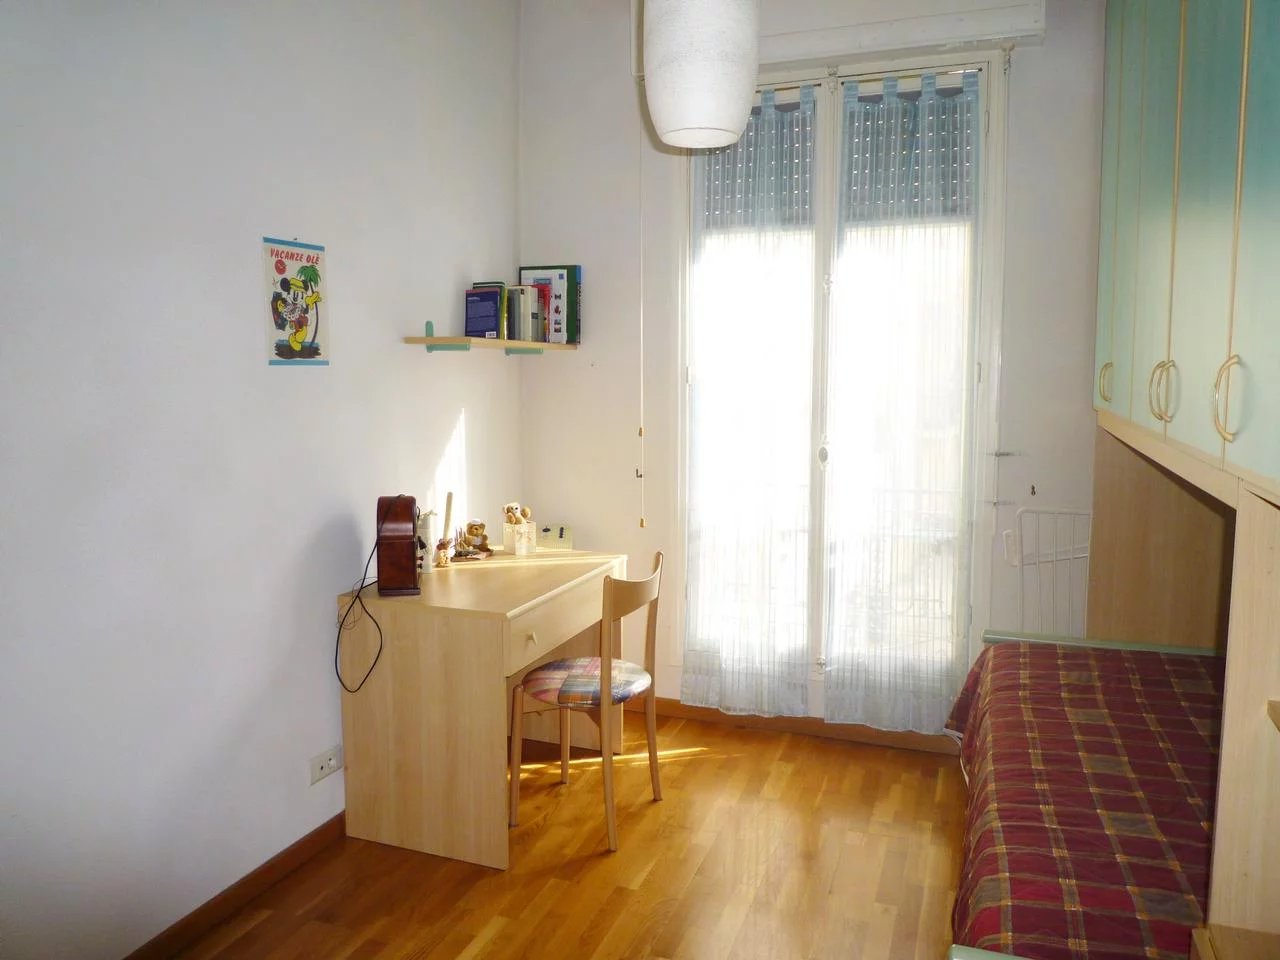 Appartement  2 Rooms 42.4m2  for sale   265 000 €